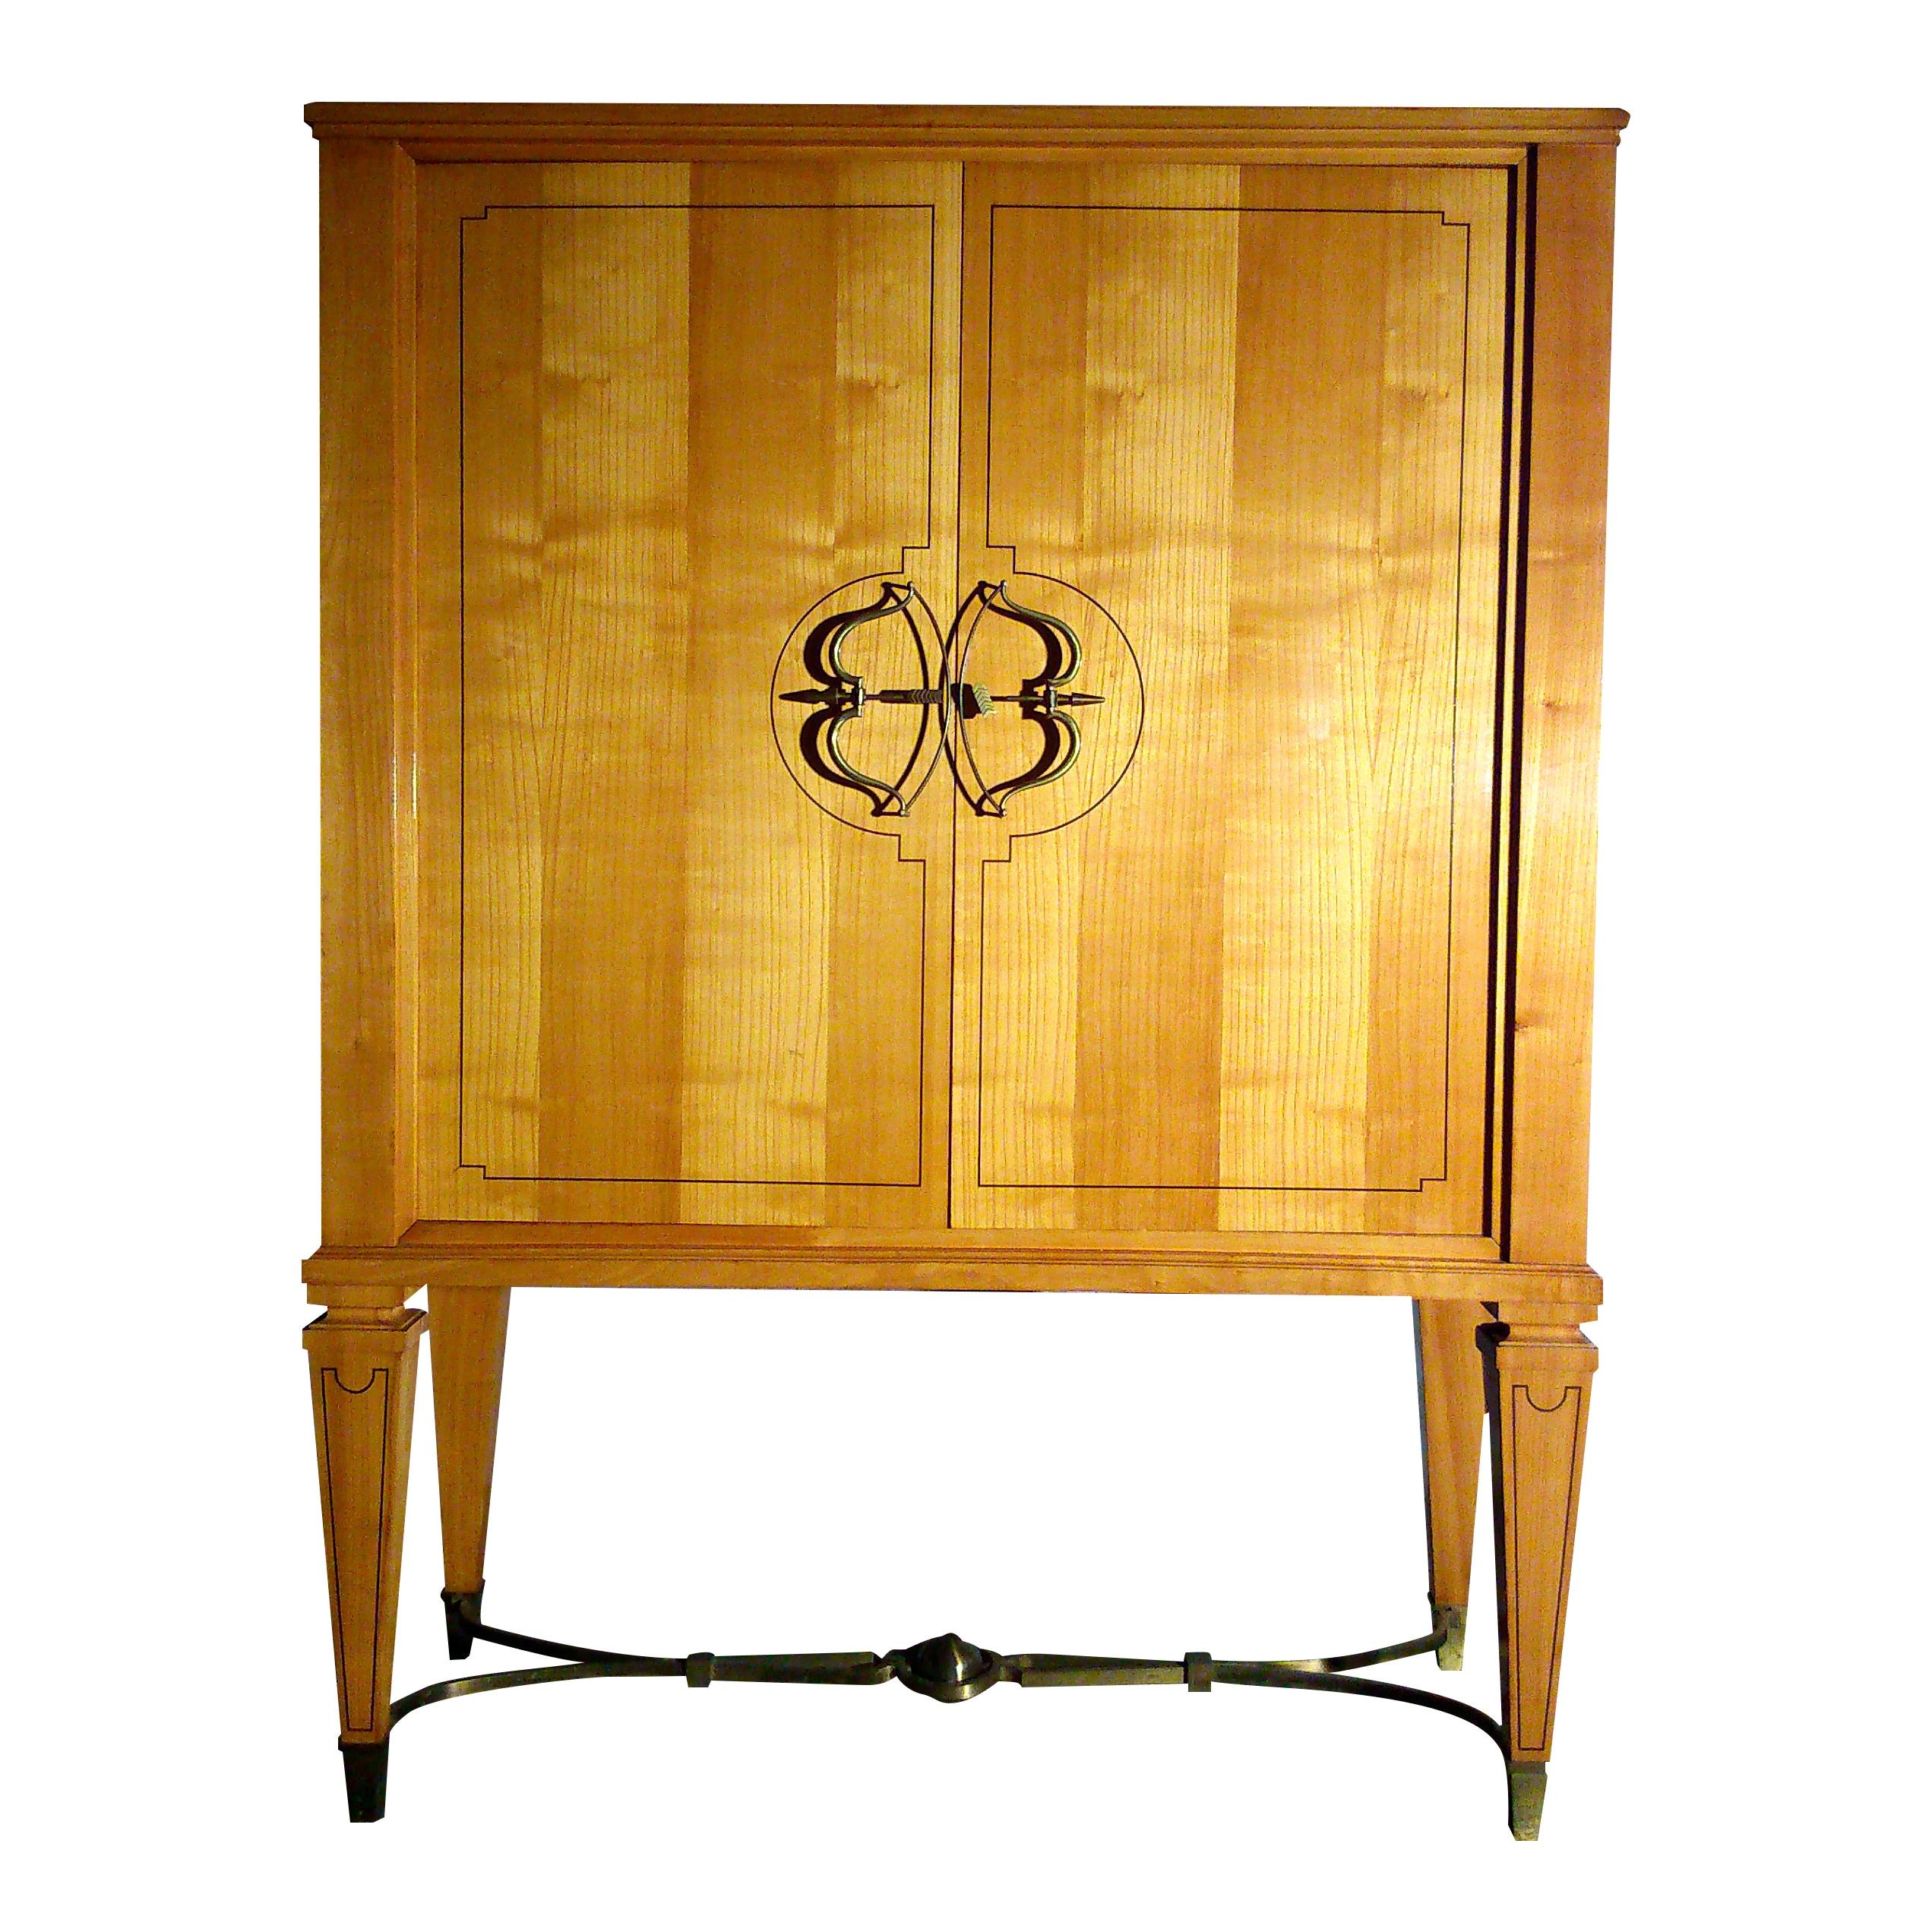 Exceptional Signed Jansen Cabinet with Brass "Ferronerie" 1950s, Ipso Facto